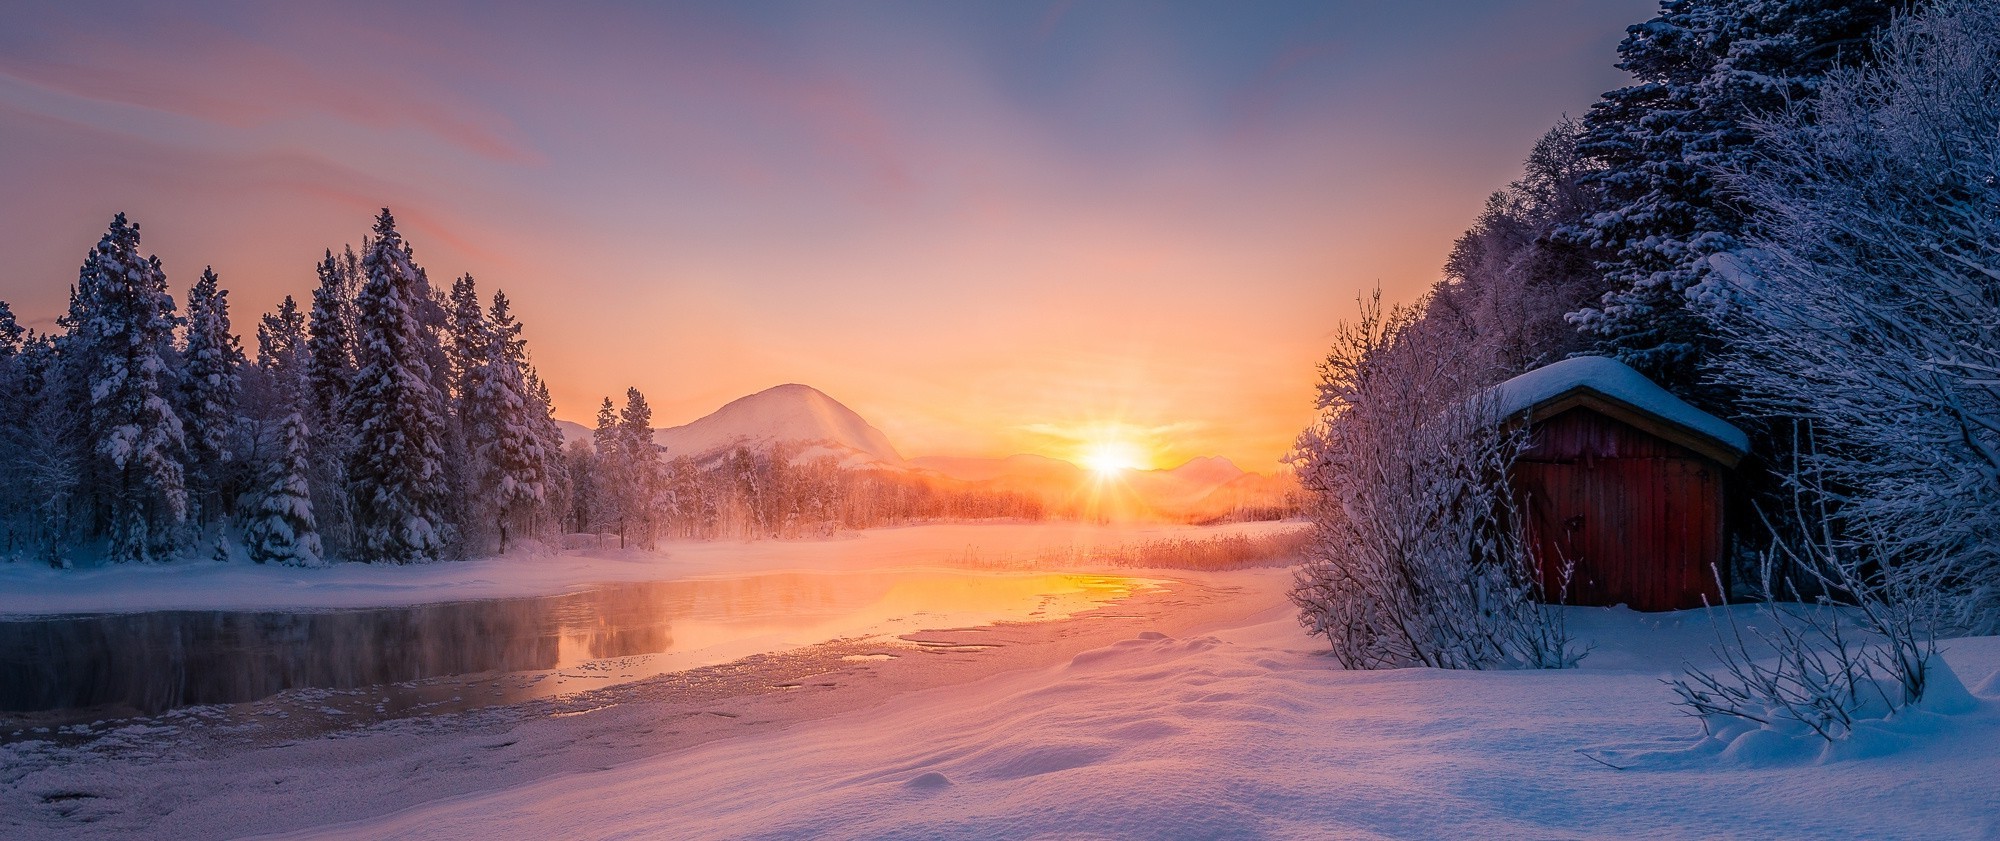 nature, Landscape, Sunrise, Winter, River, Mountain, Snow, Forest, Cabin, Cold, Sun Rays, Norway, Meditation, Calm Wallpaper